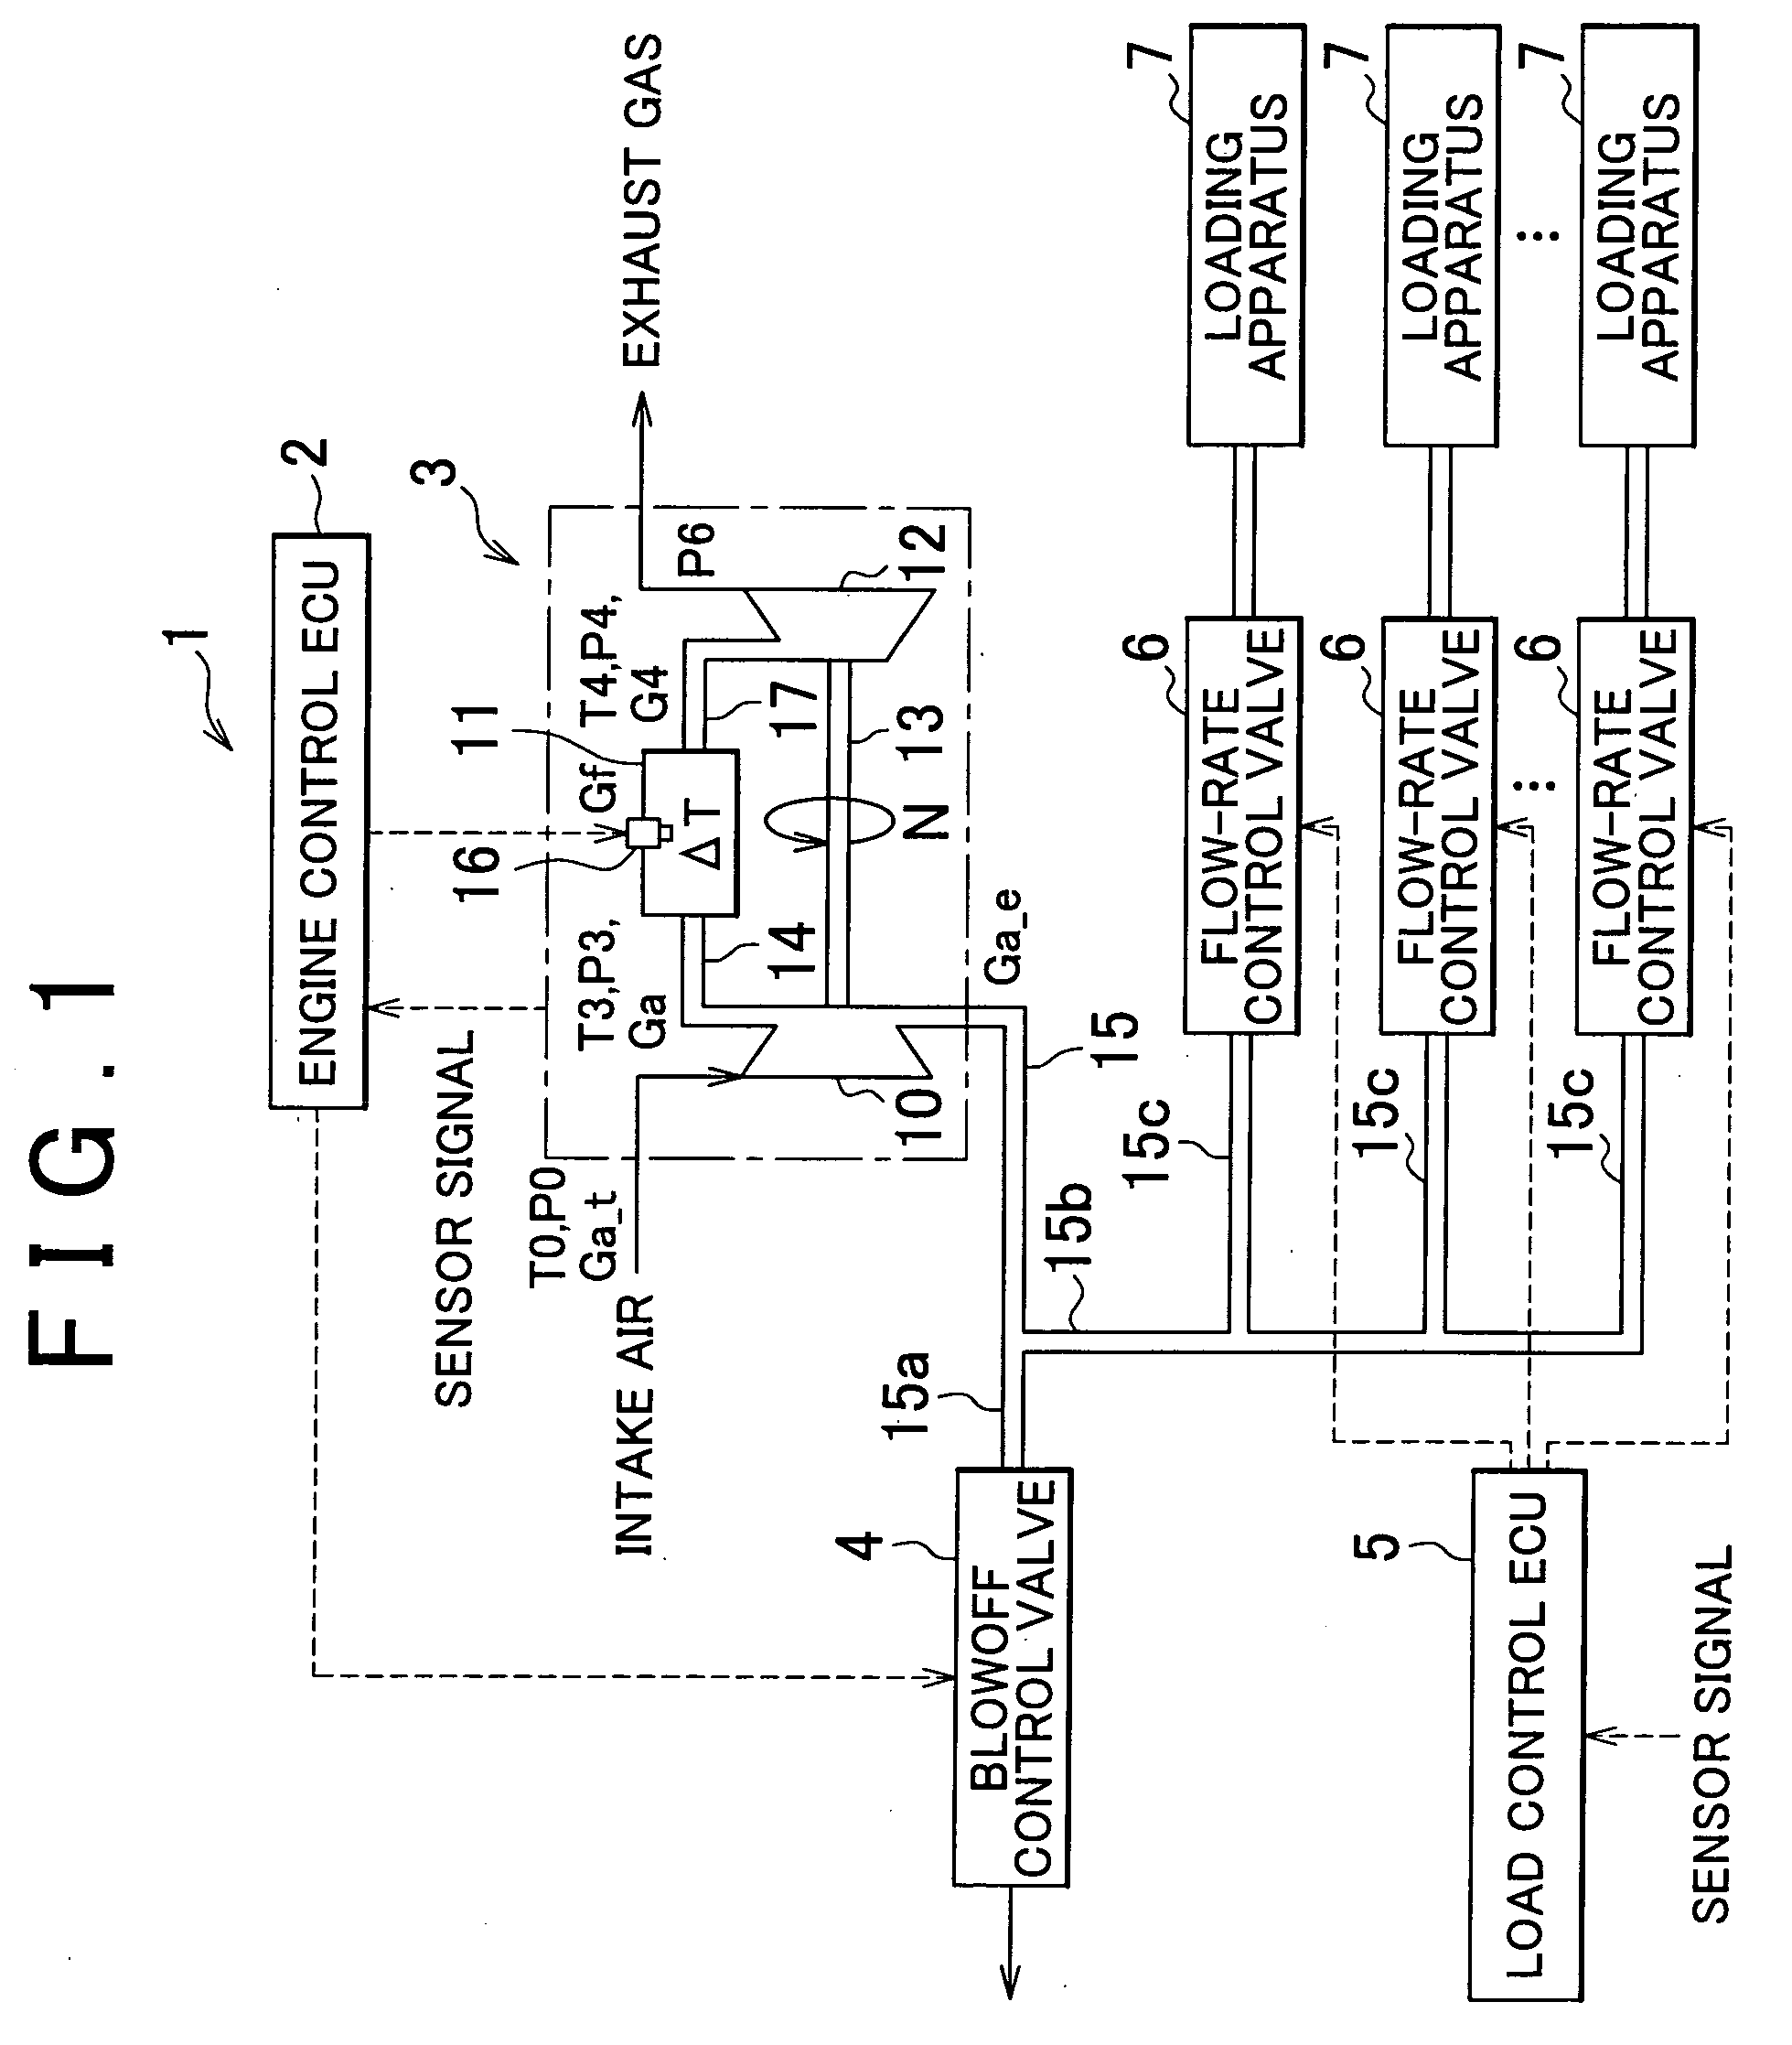 Control apparatus and method for gas-turbine engine